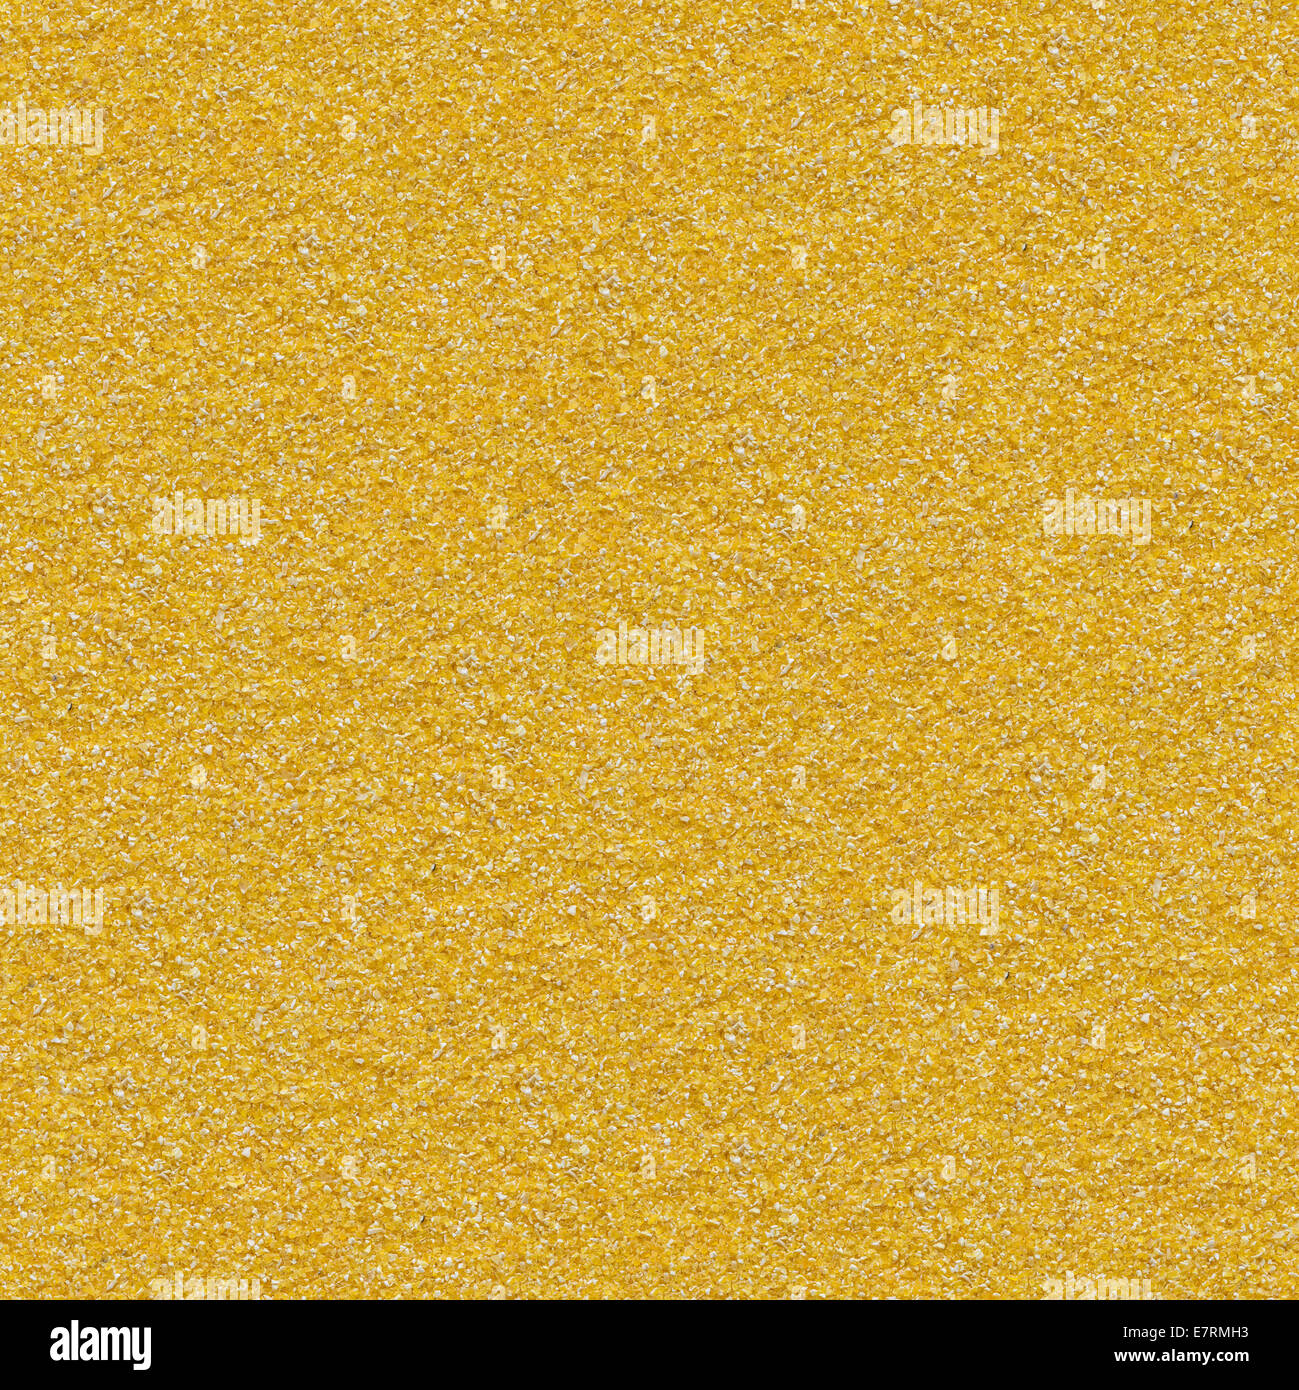 Corn Grits Background. Seamless Texture. Stock Photo